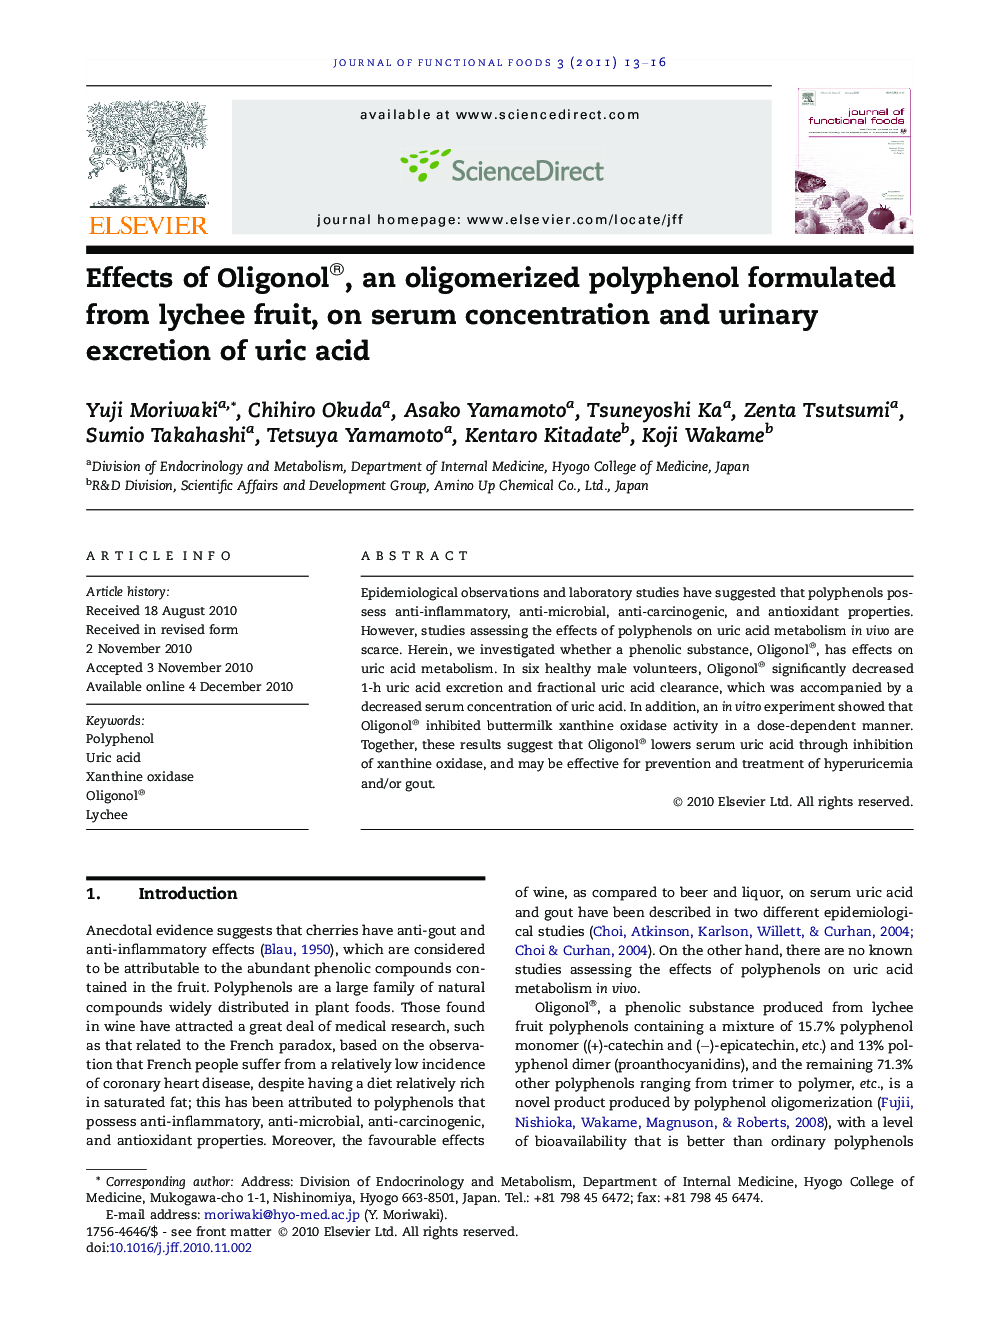 Effects of Oligonol®, an oligomerized polyphenol formulated from lychee fruit, on serum concentration and urinary excretion of uric acid